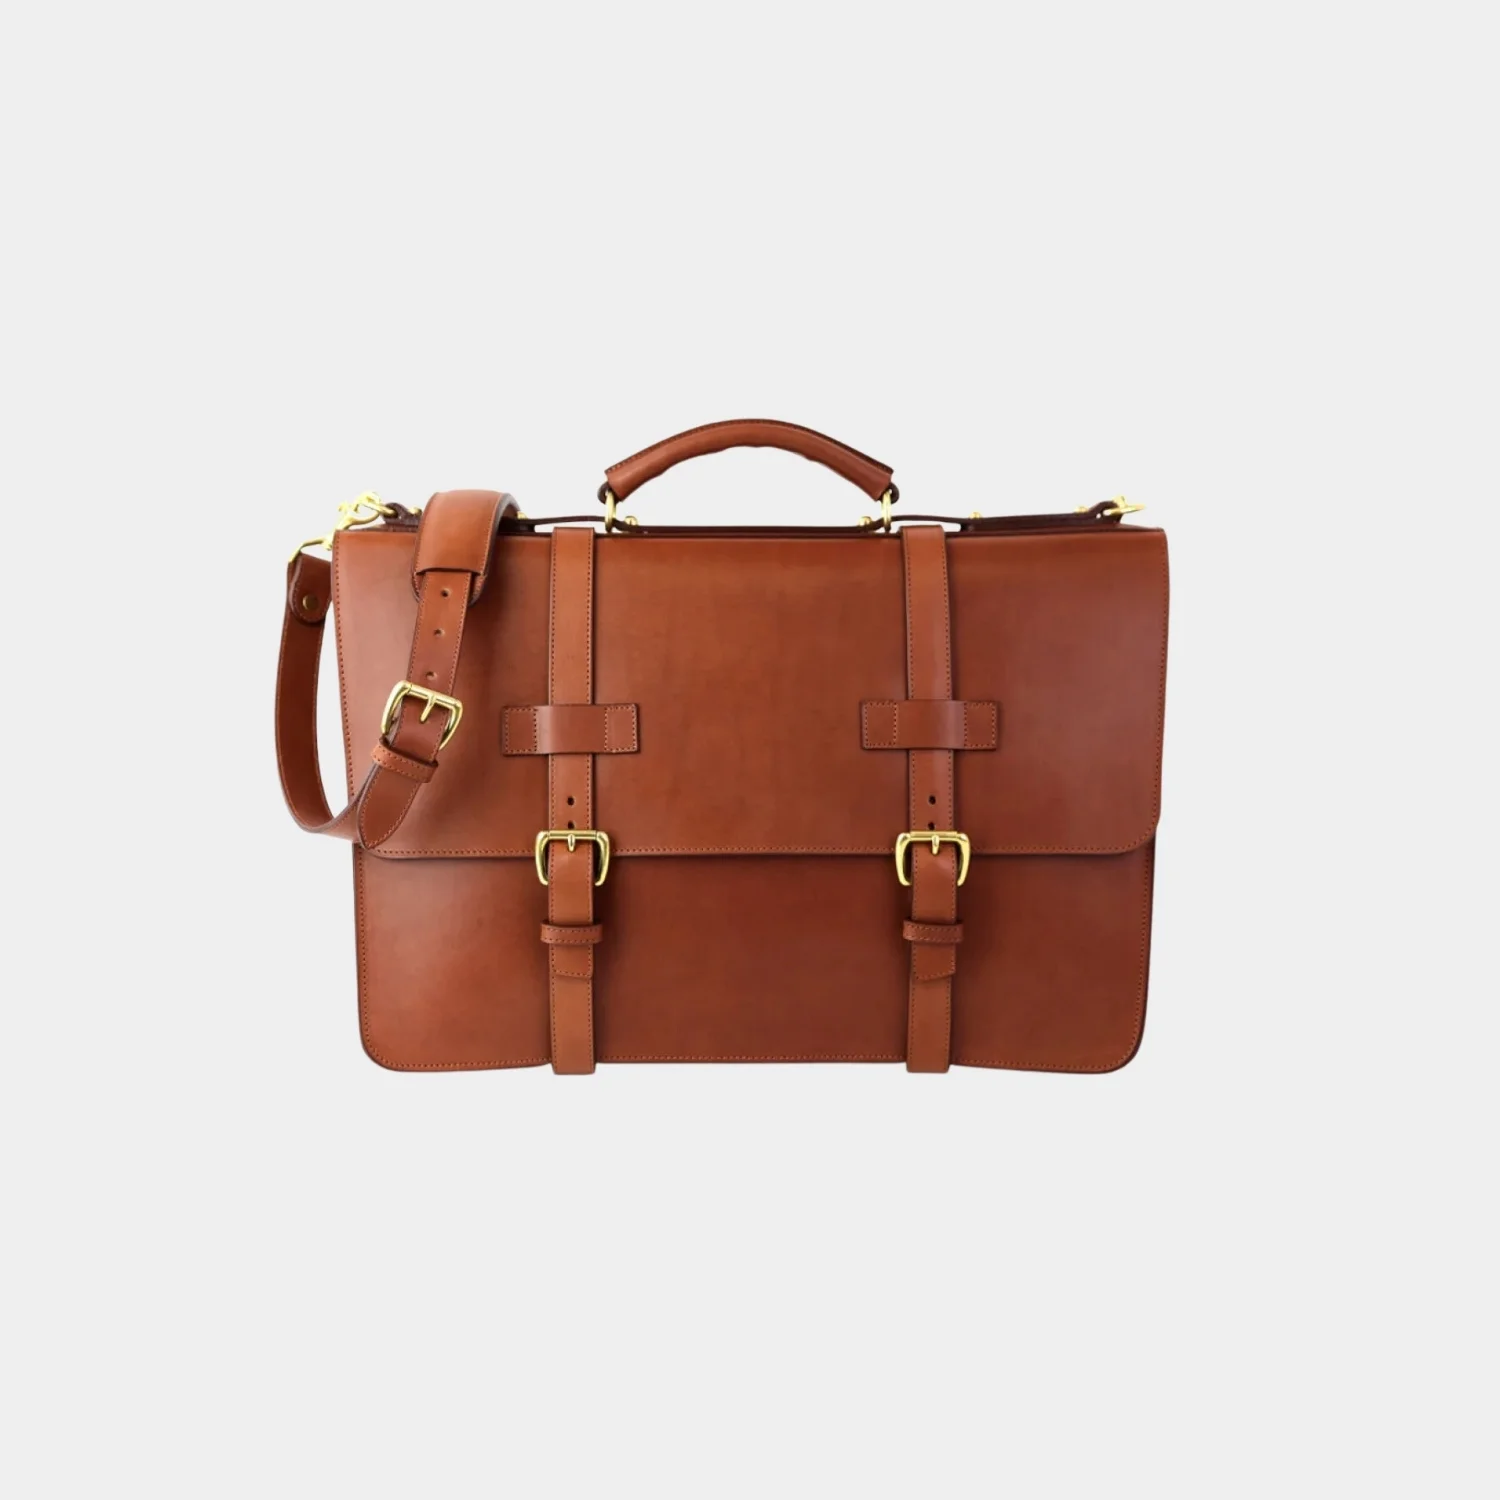 American Style Brown Leather Briefcase